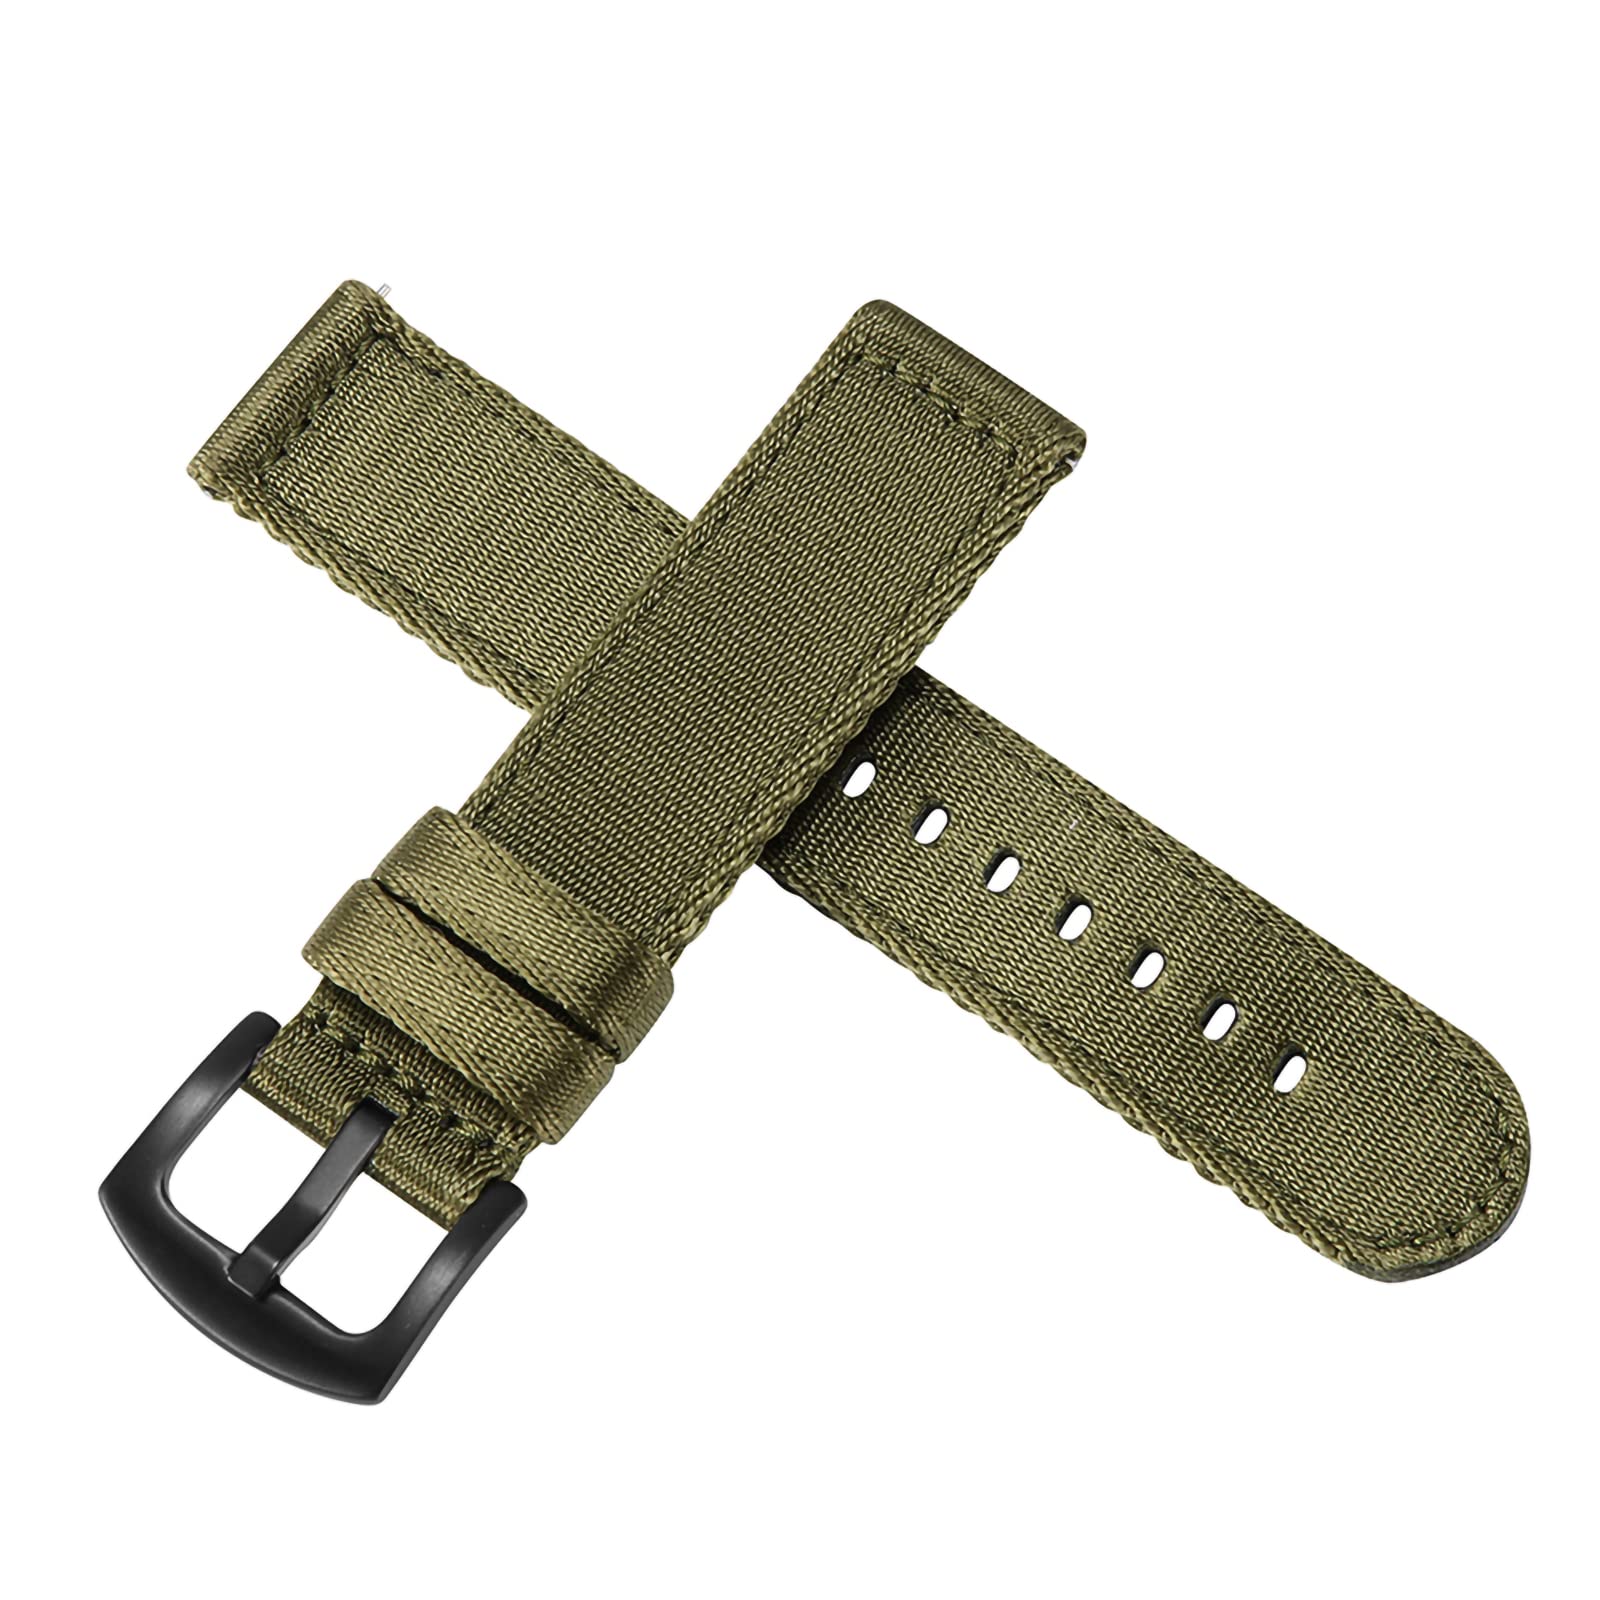 WOUKUP Military Quick Release Nylon Watch Bands Premium Seat Belt Material Watch Strap 18mm 20mm 22mm Watchband for Men and Women